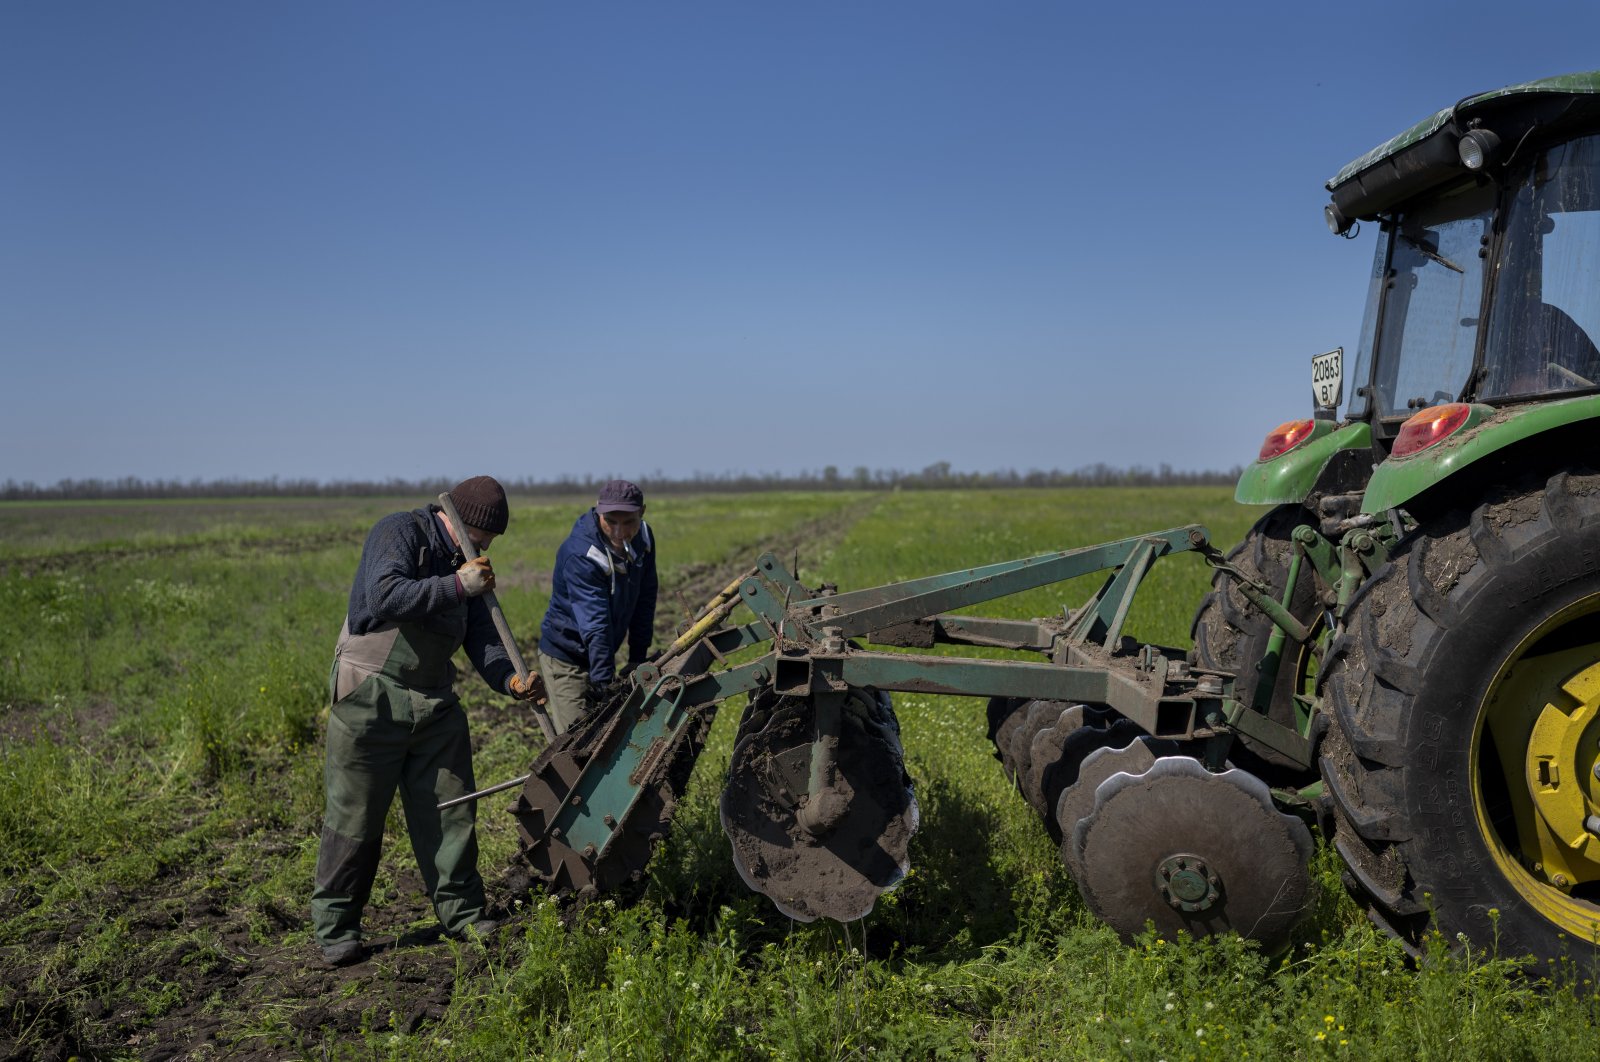 Lives or livelihoods: Much at stake for struggling Ukrainian farmers